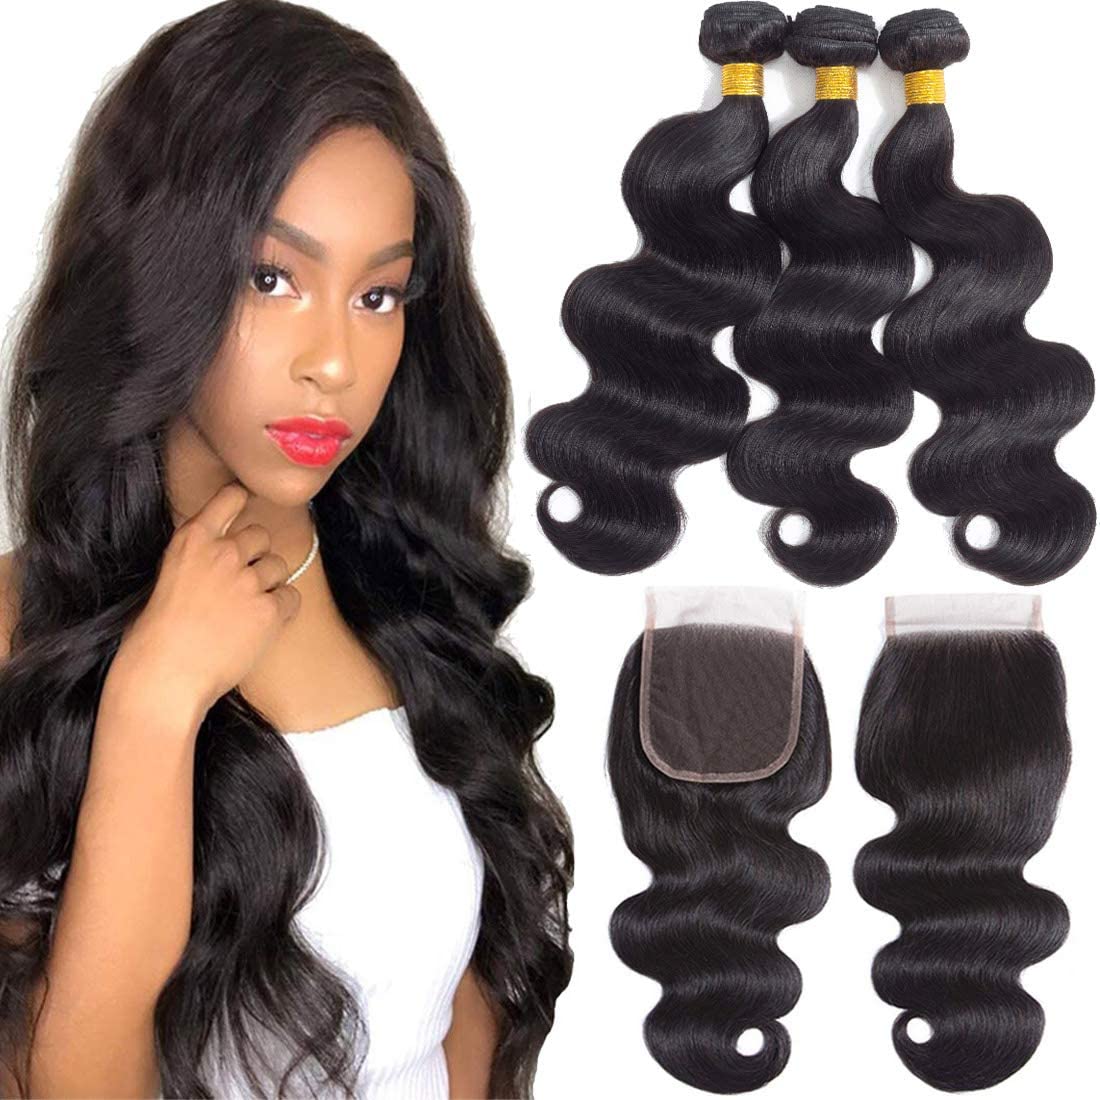 10A Brazilian Curly Hair Weave 3 Bundles Kinky Curly Human Hair 100%  Unprocessed Hair Weft Extensions Natural Black Color(18 20 22inch) 